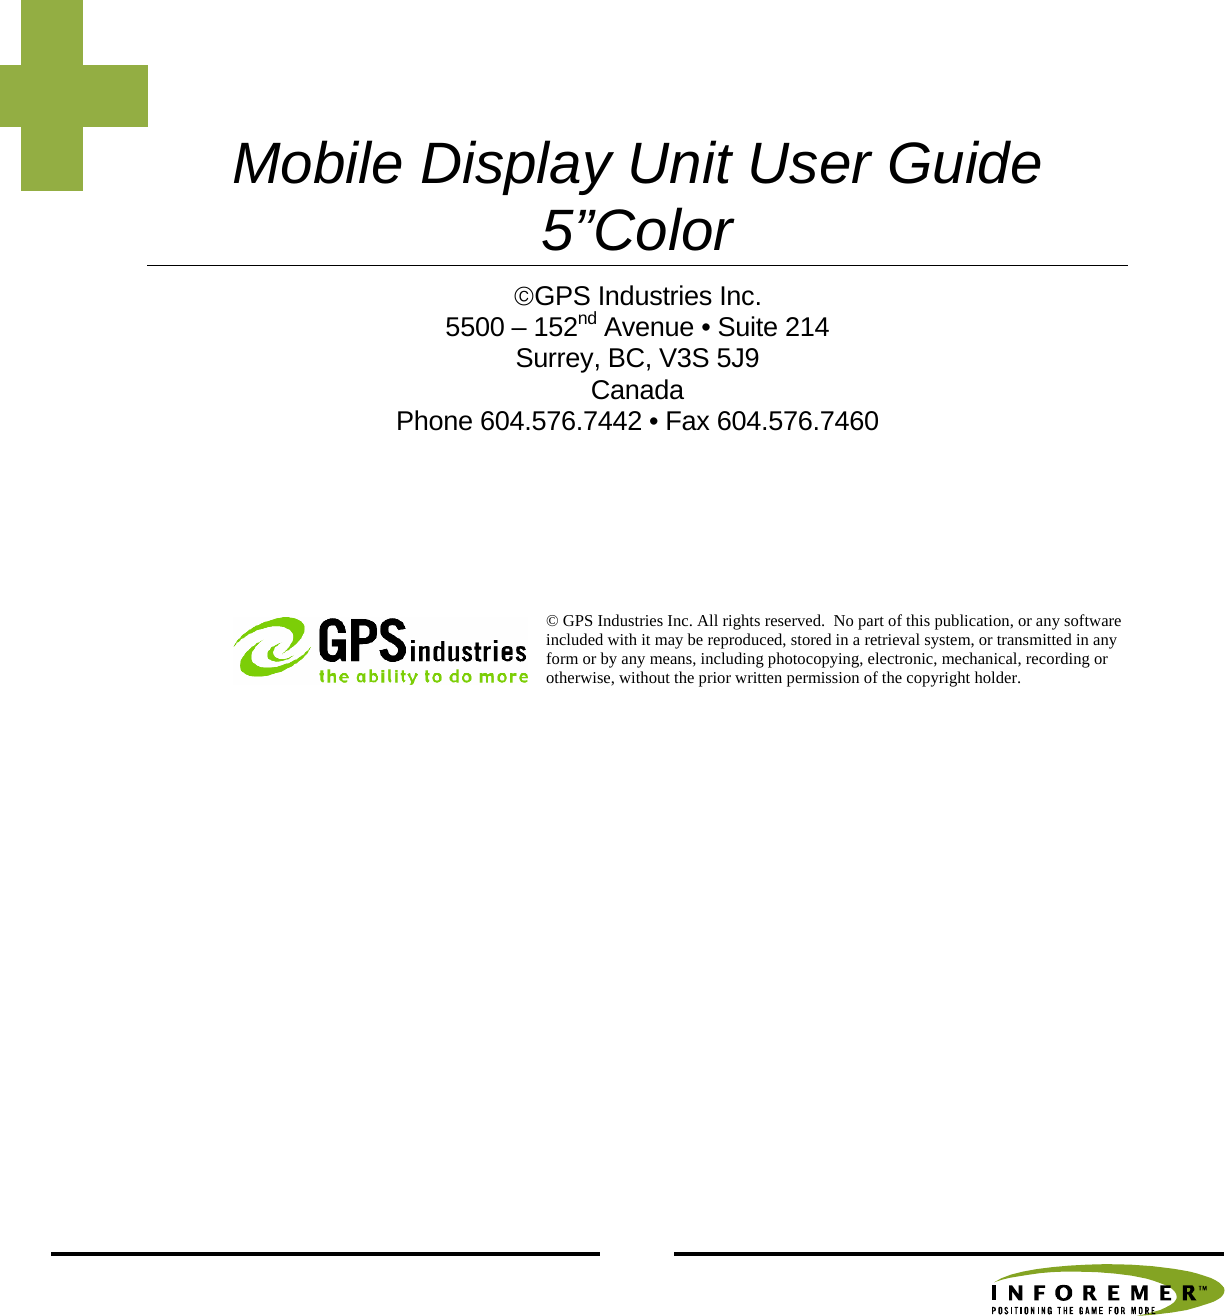    Mobile Display Unit User Guide 5”Color ©GPS Industries Inc. 5500 – 152nd Avenue • Suite 214 Surrey, BC, V3S 5J9 Canada Phone 604.576.7442 • Fax 604.576.7460 © GPS Industries Inc. All rights reserved.  No part of this publication, or any software included with it may be reproduced, stored in a retrieval system, or transmitted in any form or by any means, including photocopying, electronic, mechanical, recording or otherwise, without the prior written permission of the copyright holder.          